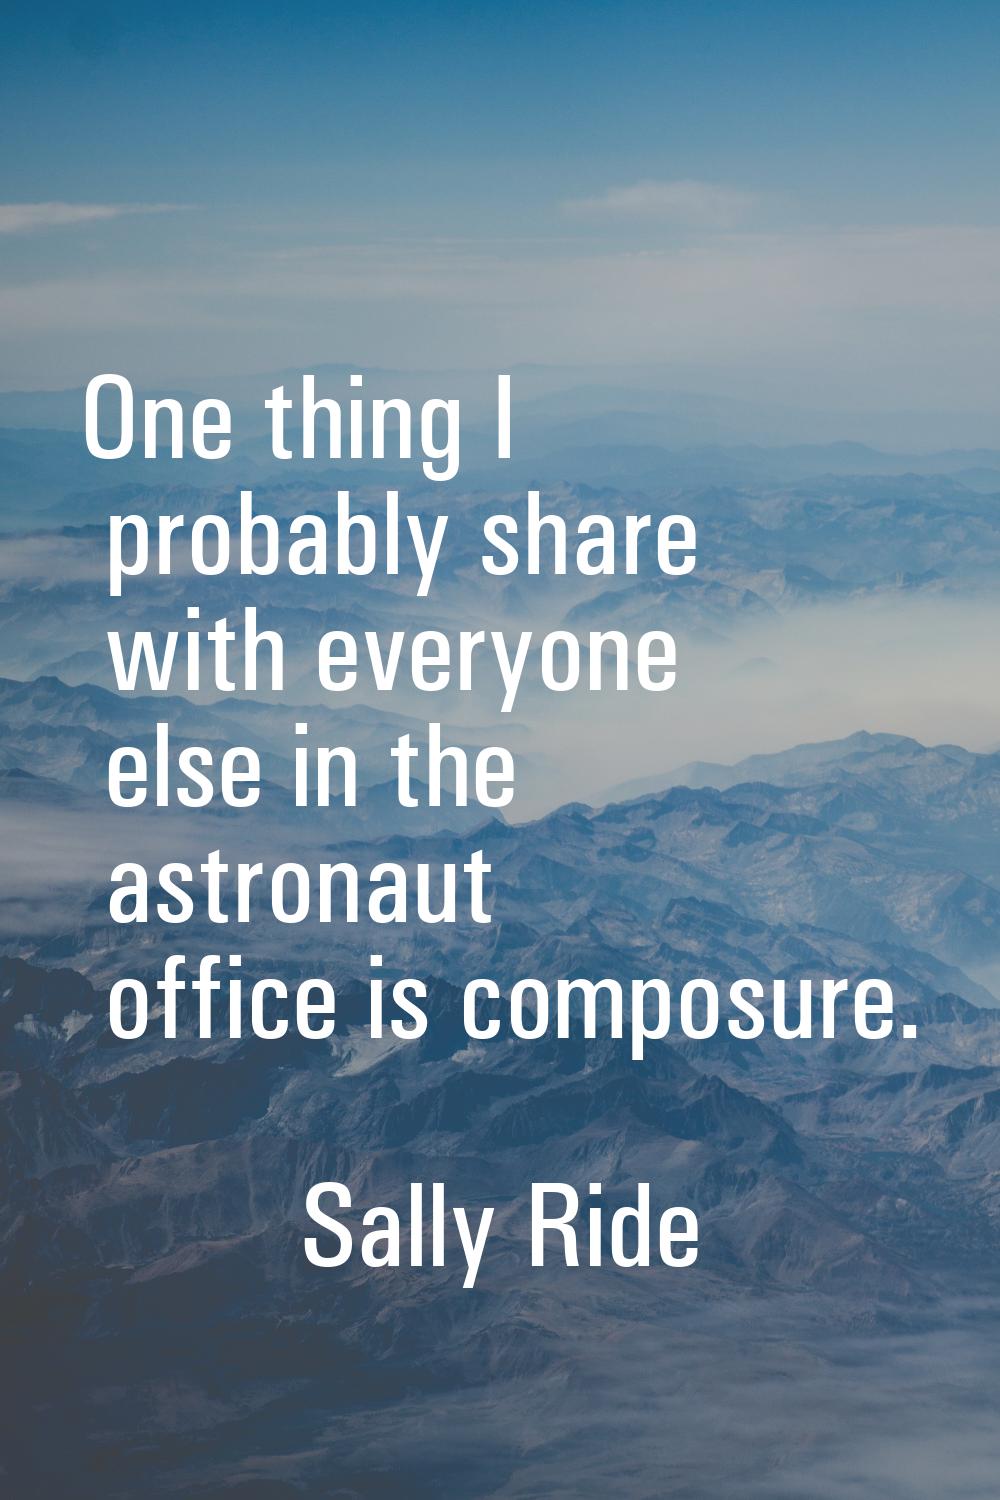 One thing I probably share with everyone else in the astronaut office is composure.